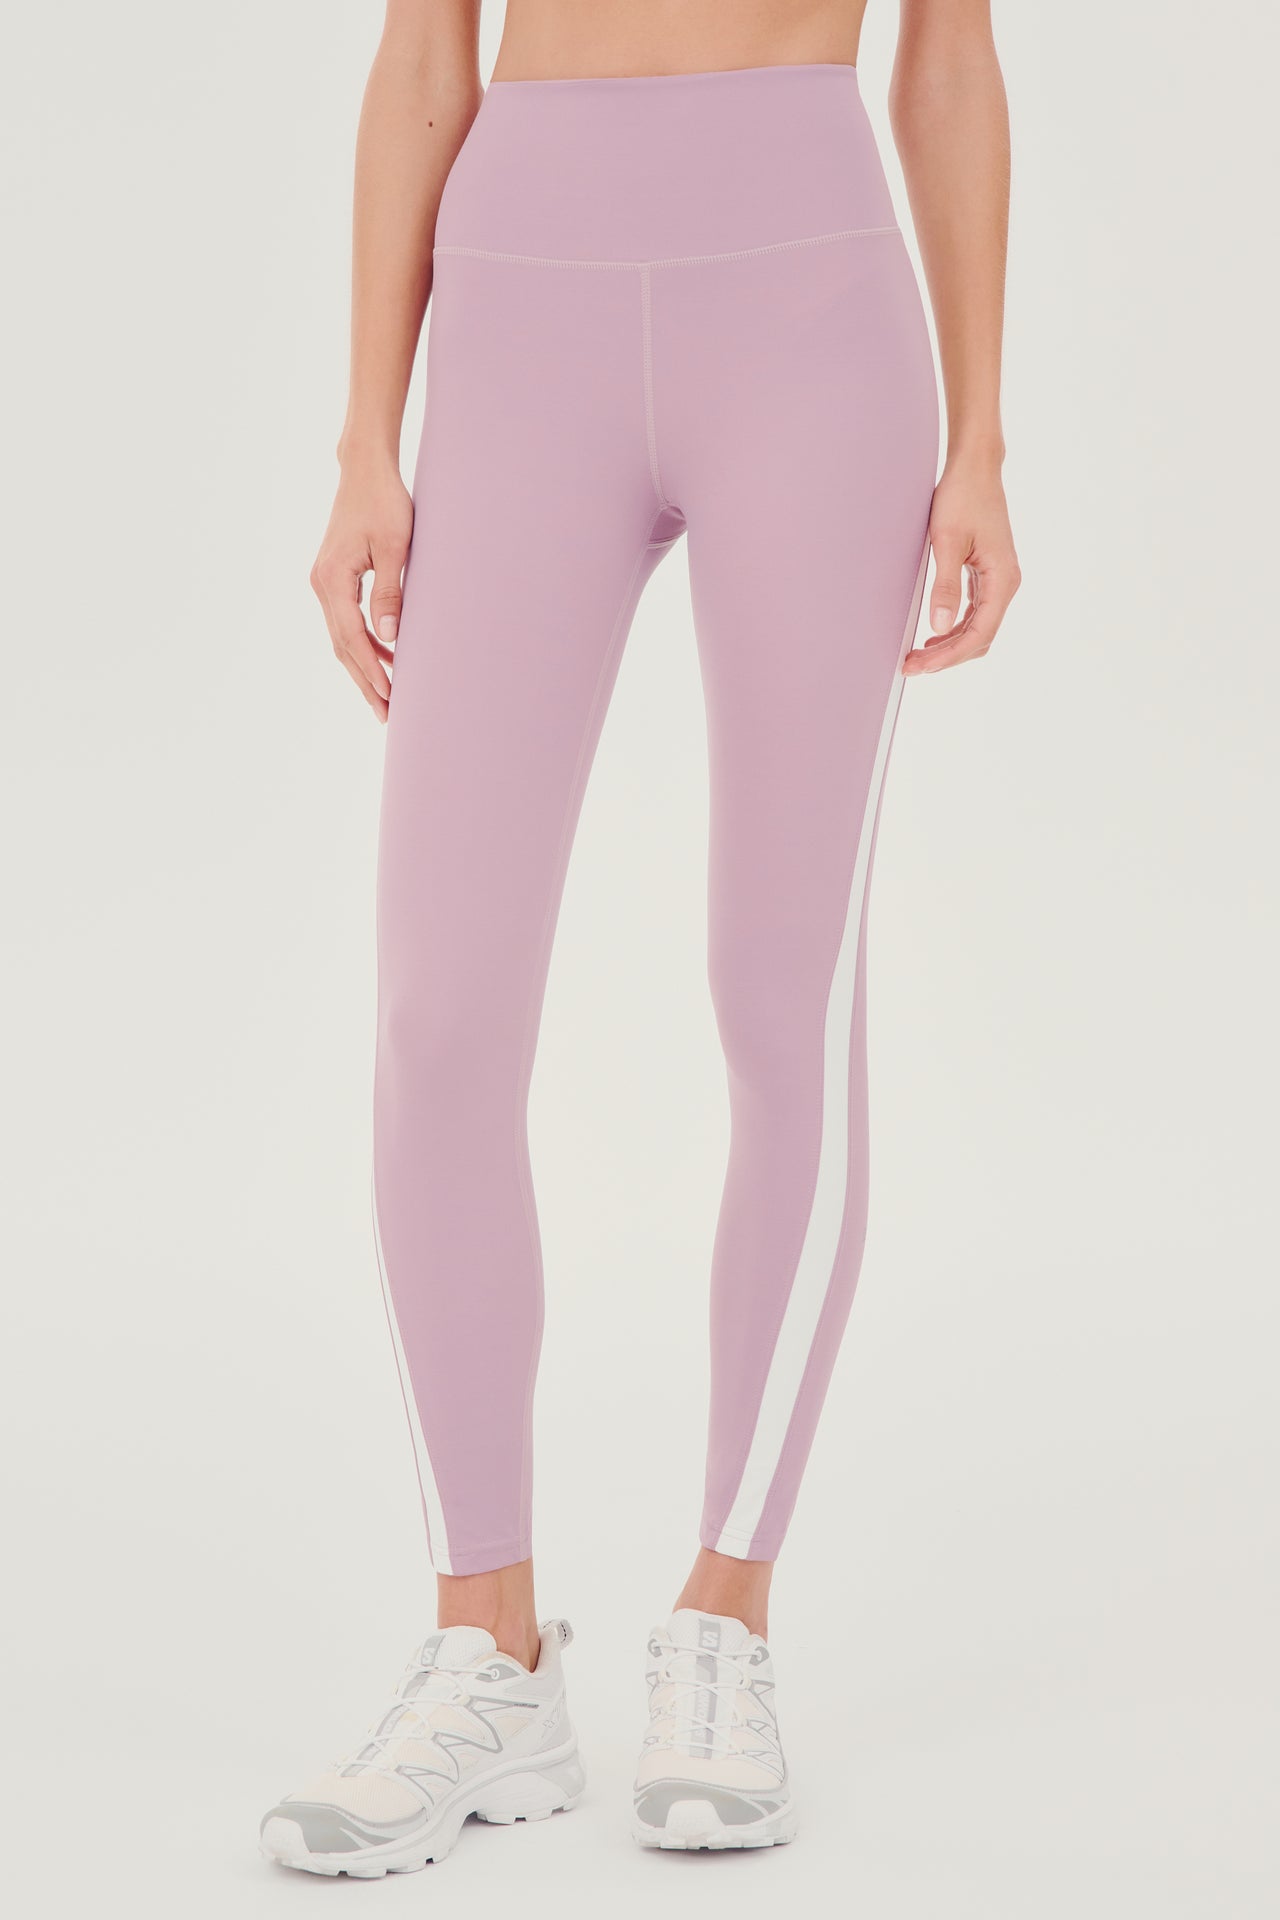 A woman's Miles High Waist Rigor 7/8 leggings in Blush and White, perfect for yoga by SPLITS59.